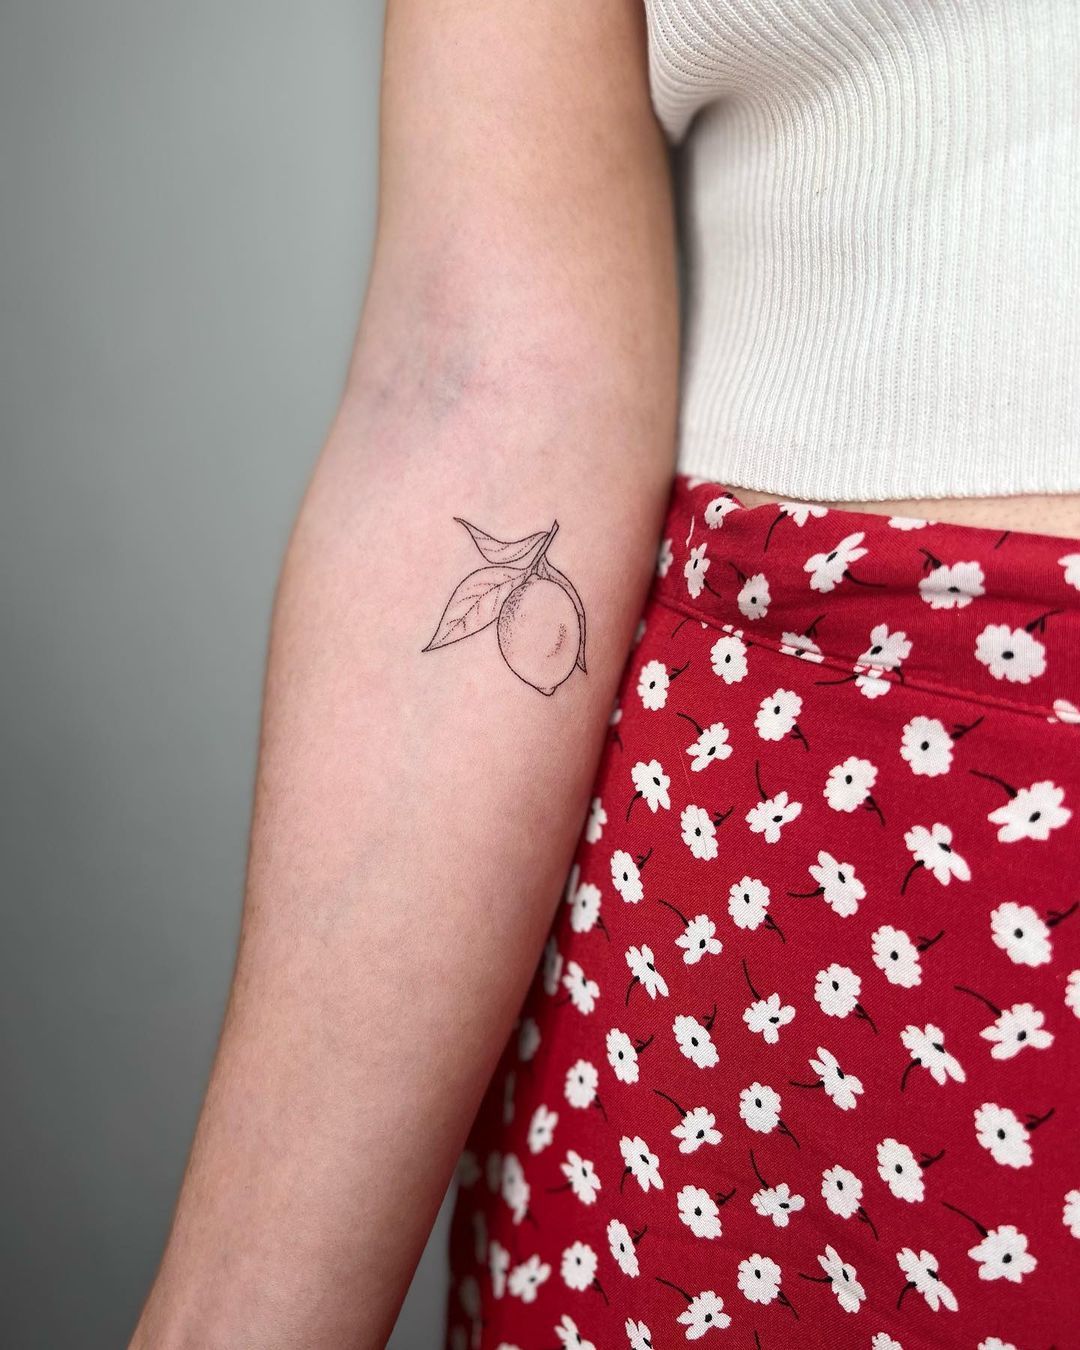 35 Minimalist Tattoos with Awesome Design Ideas